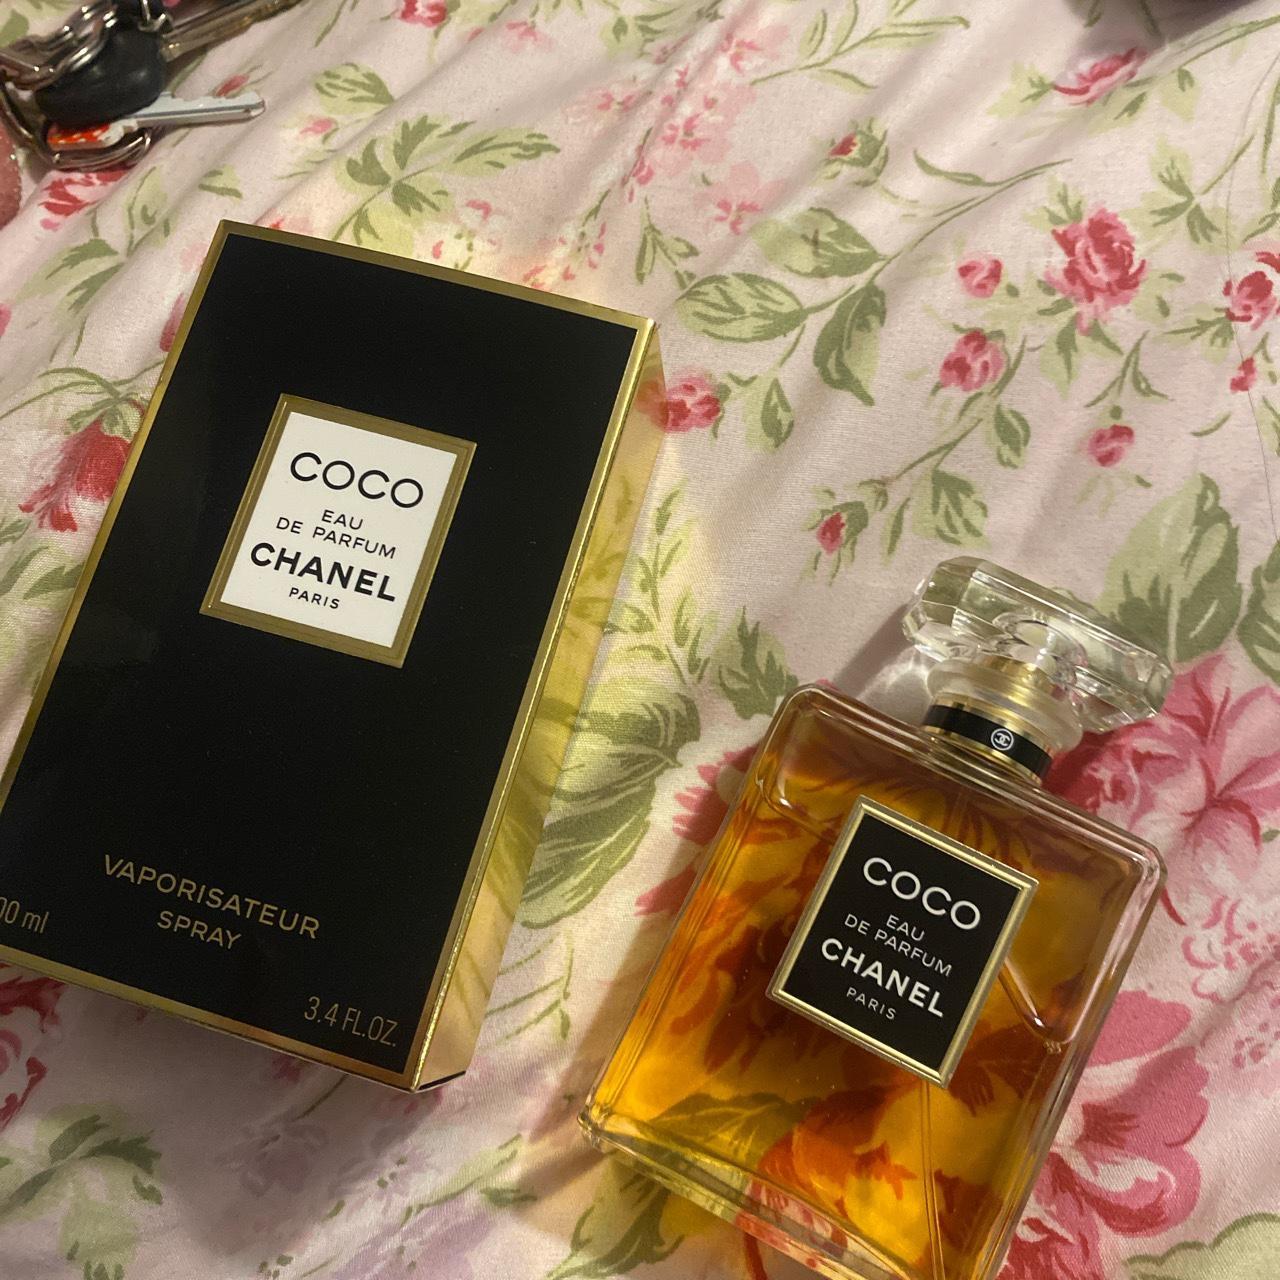 CHANEL CHANCE FULL PERFUME BOTTLE WITHOUT BOX - a - Depop